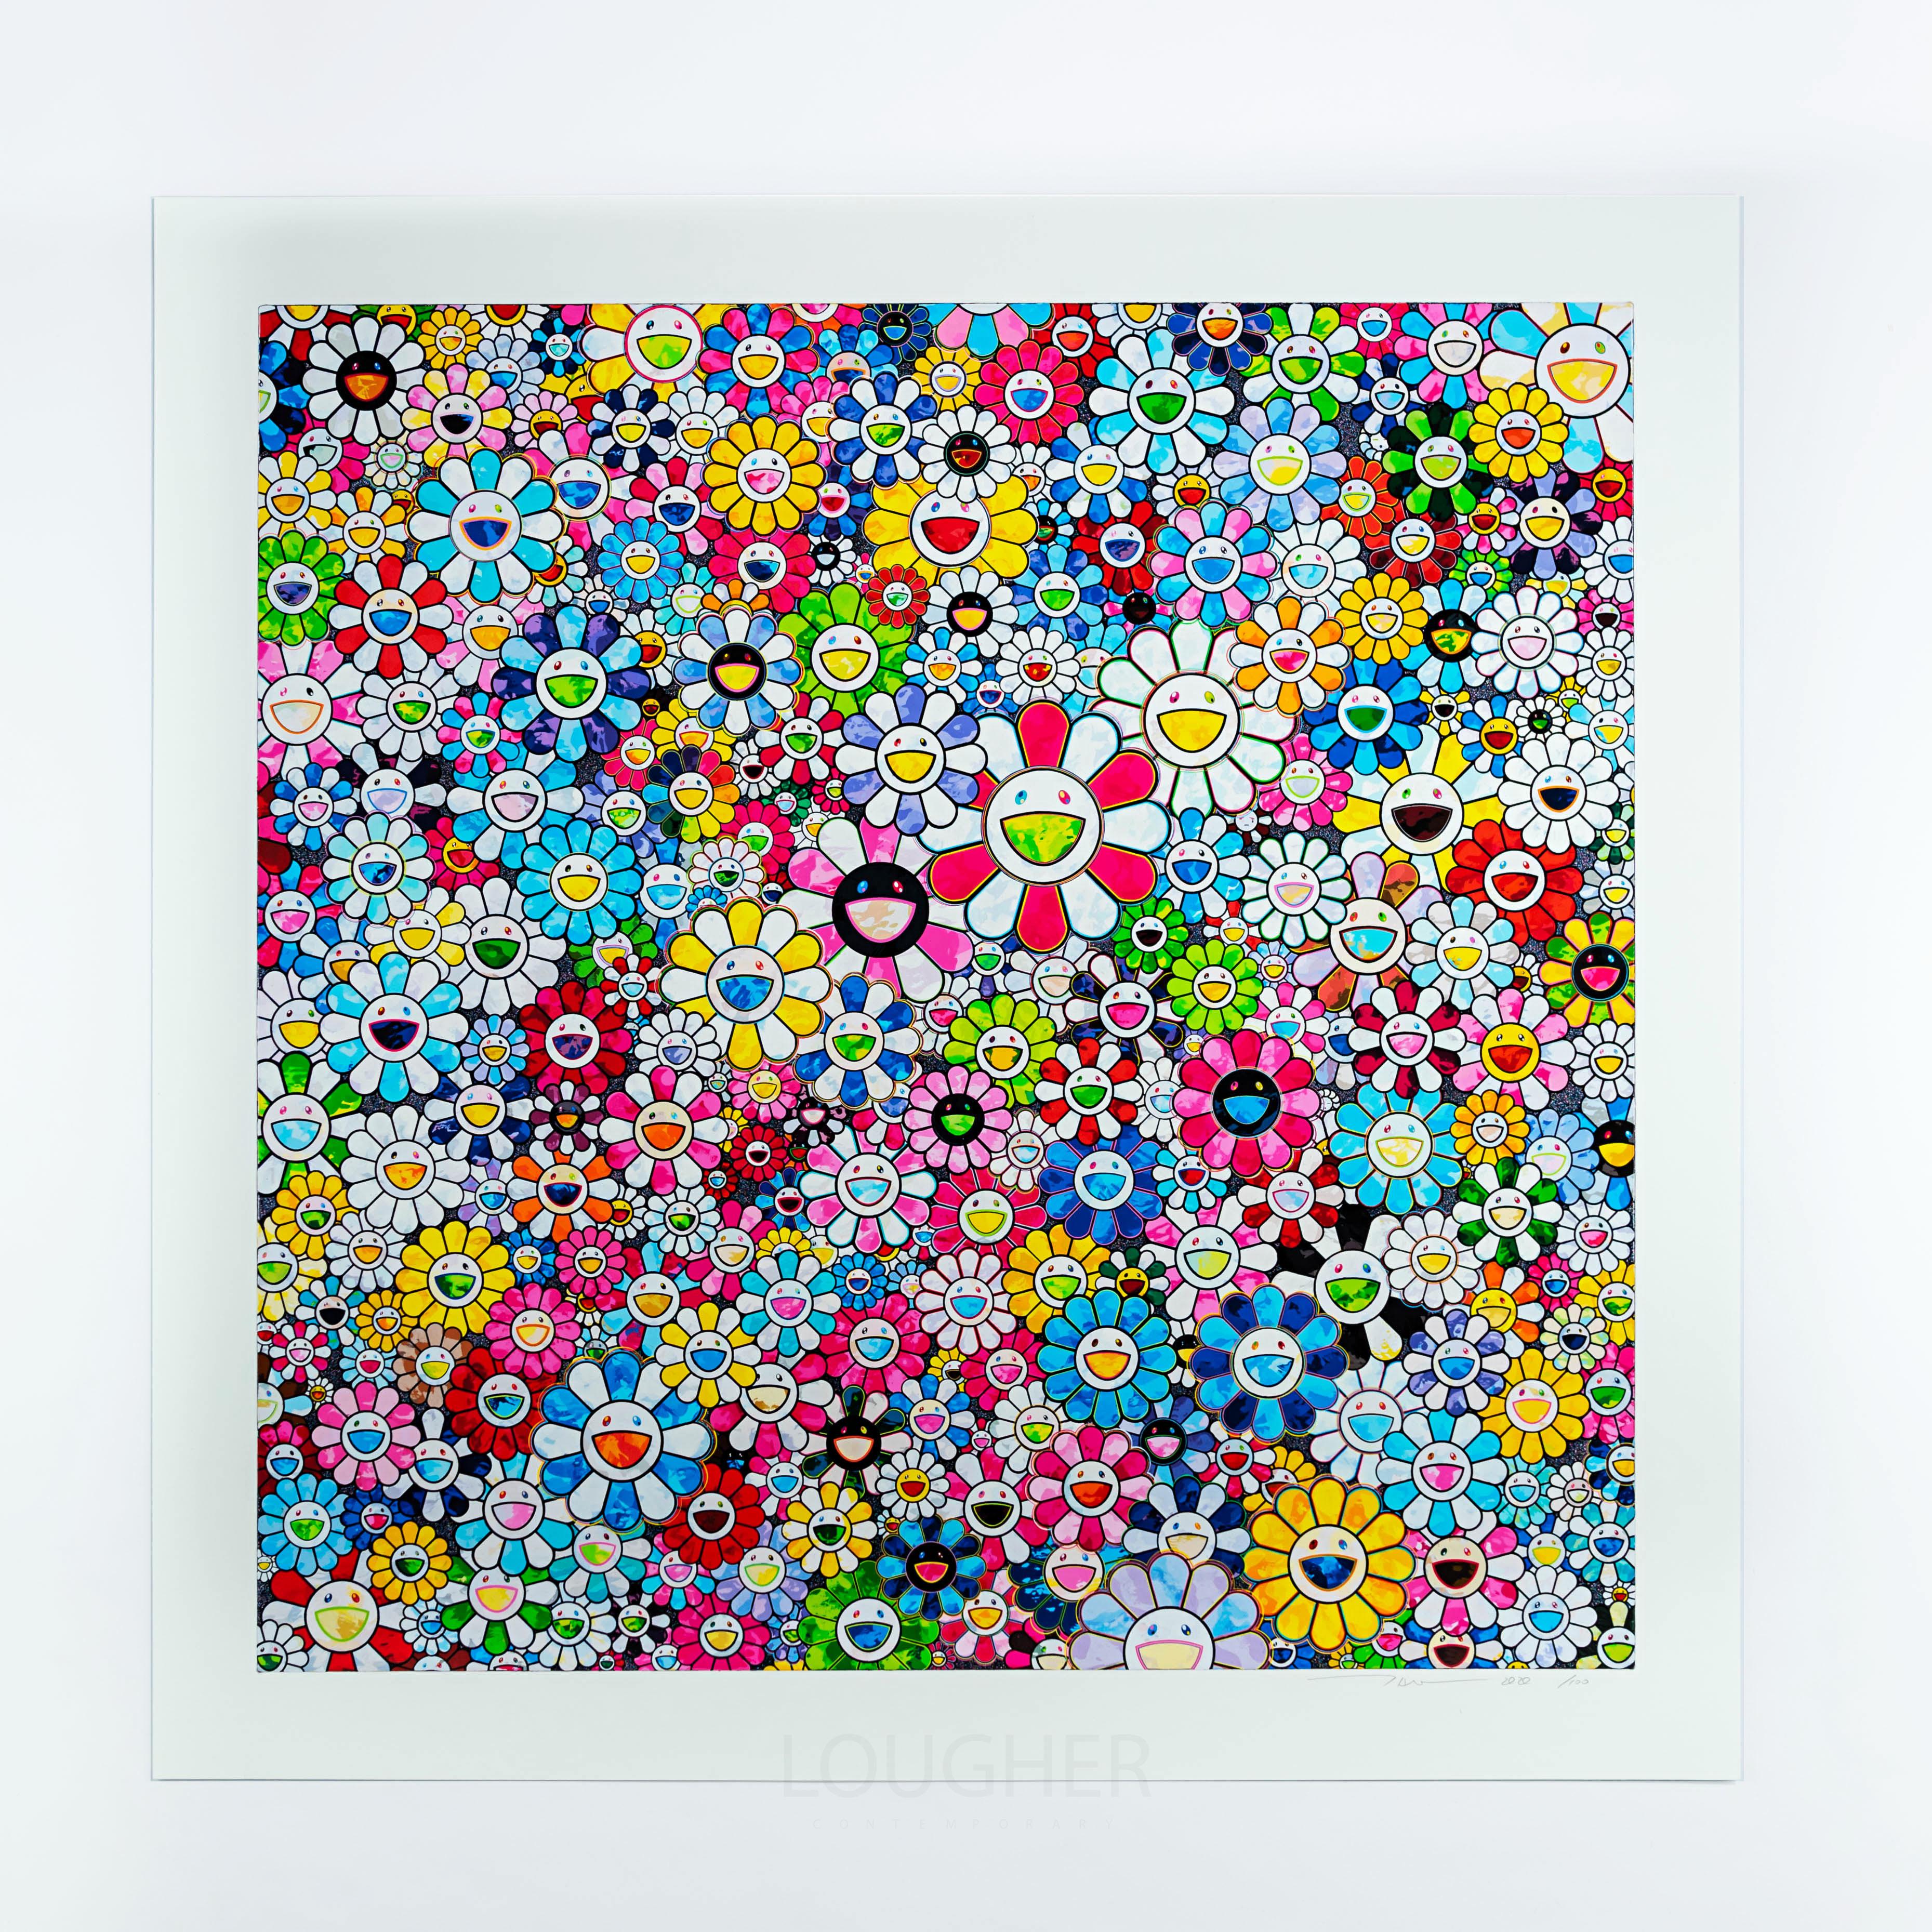 Flowers with Smiley Faces - Print by Takashi Murakami